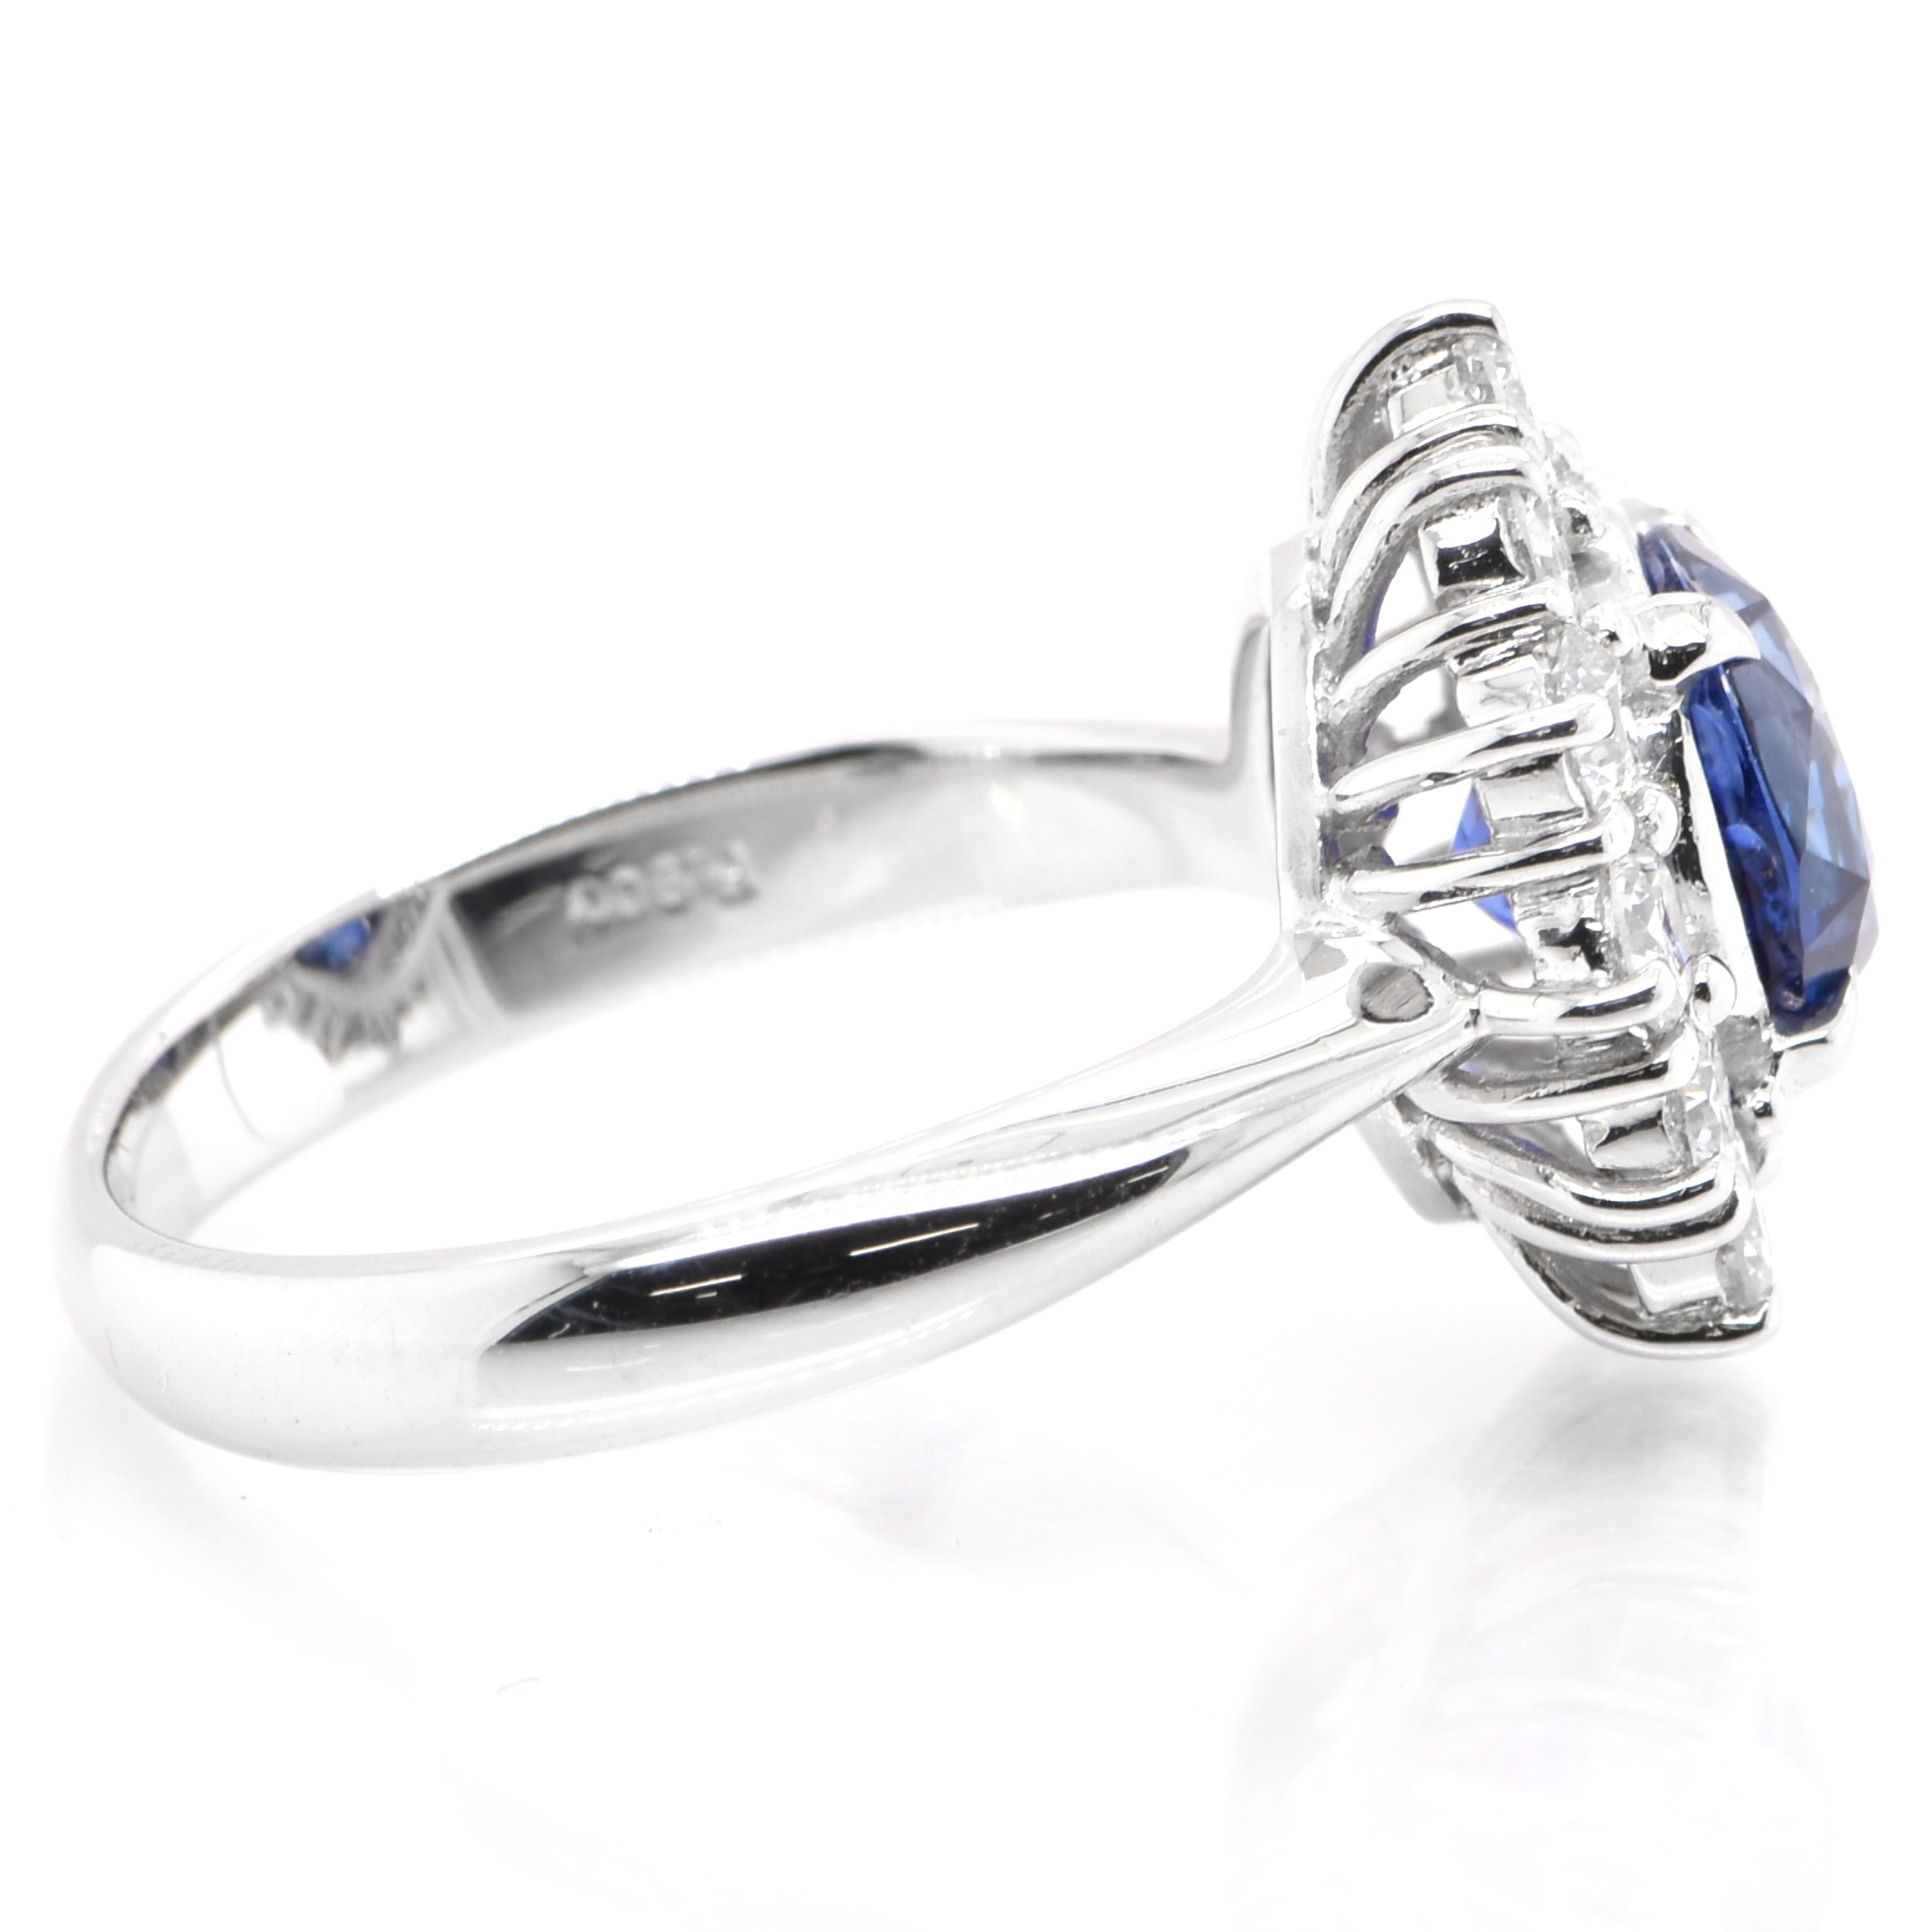 2.57 Carat Natural Royal Blue Sapphire and Diamond Ring Set in Platinum In Excellent Condition For Sale In Tokyo, JP